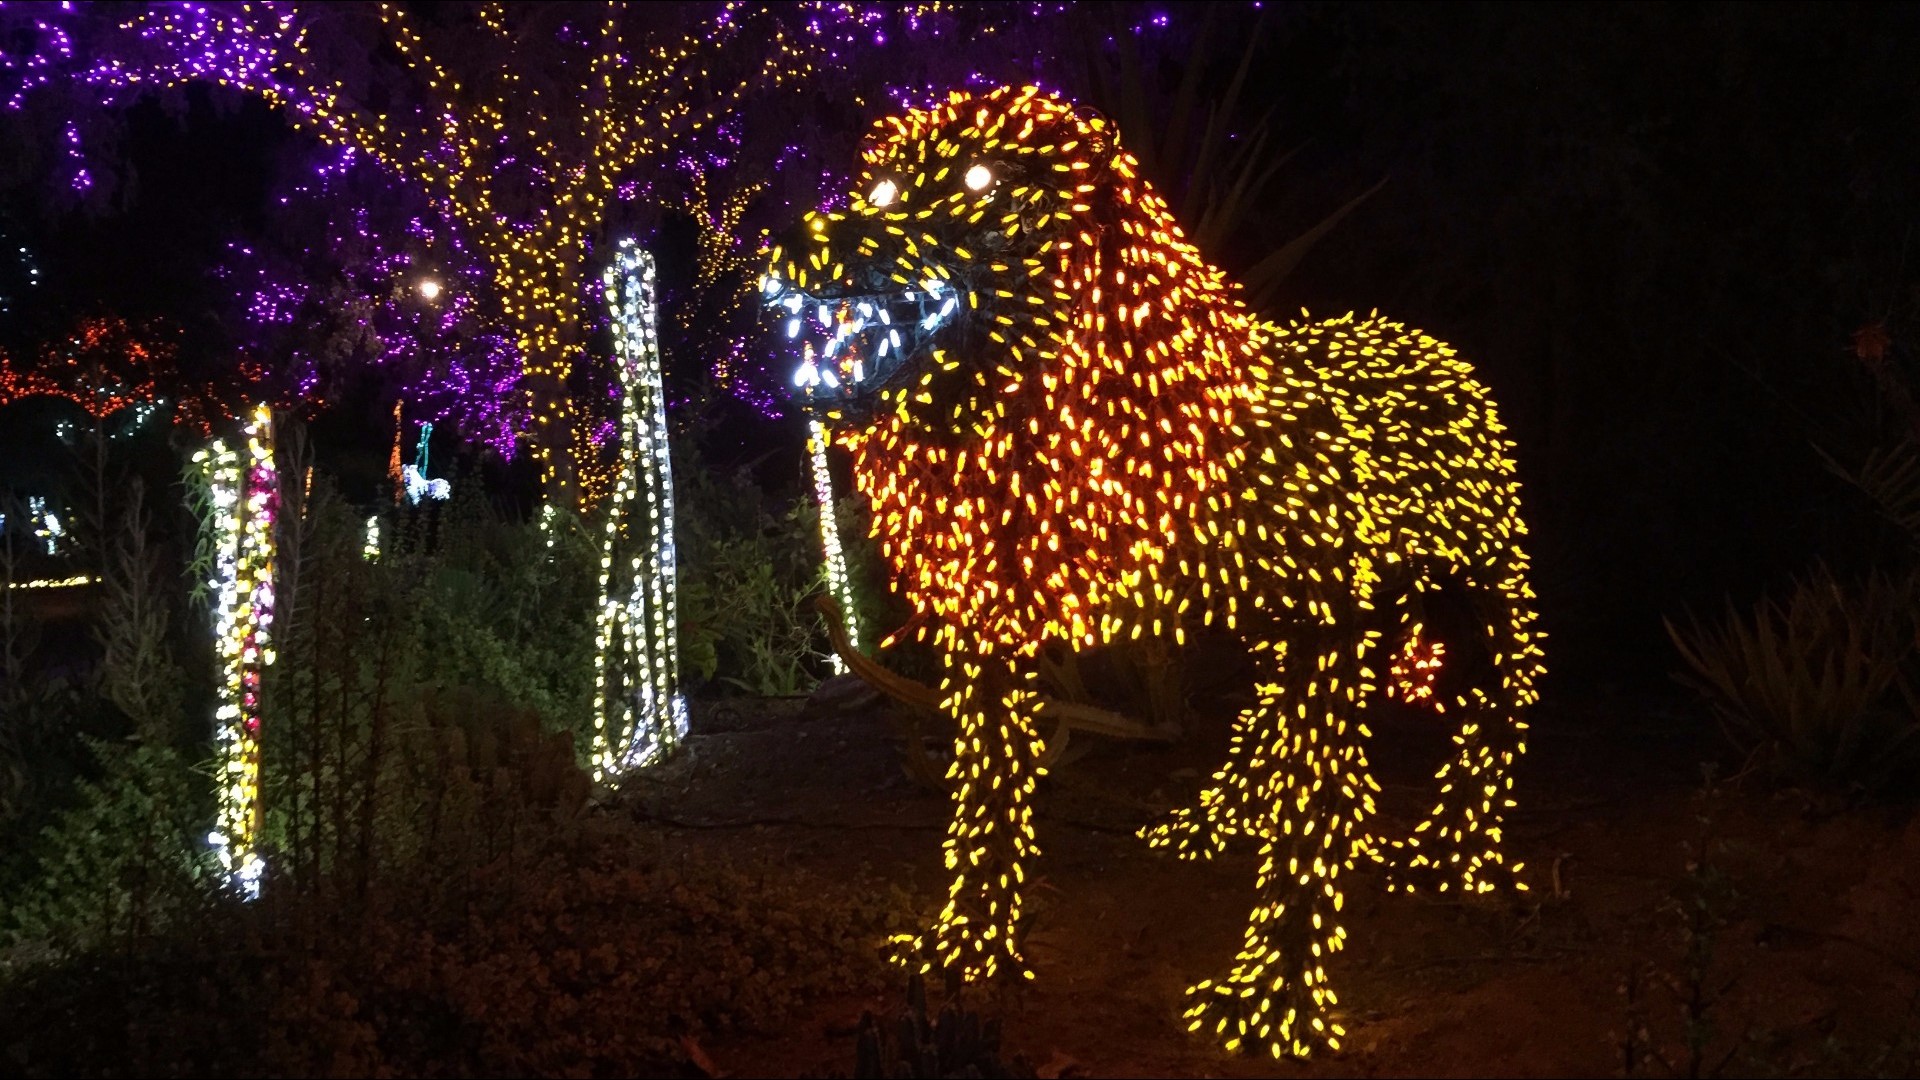 Cast your vote! Phoenix Zoo hoping to be recognized as best zoo lights